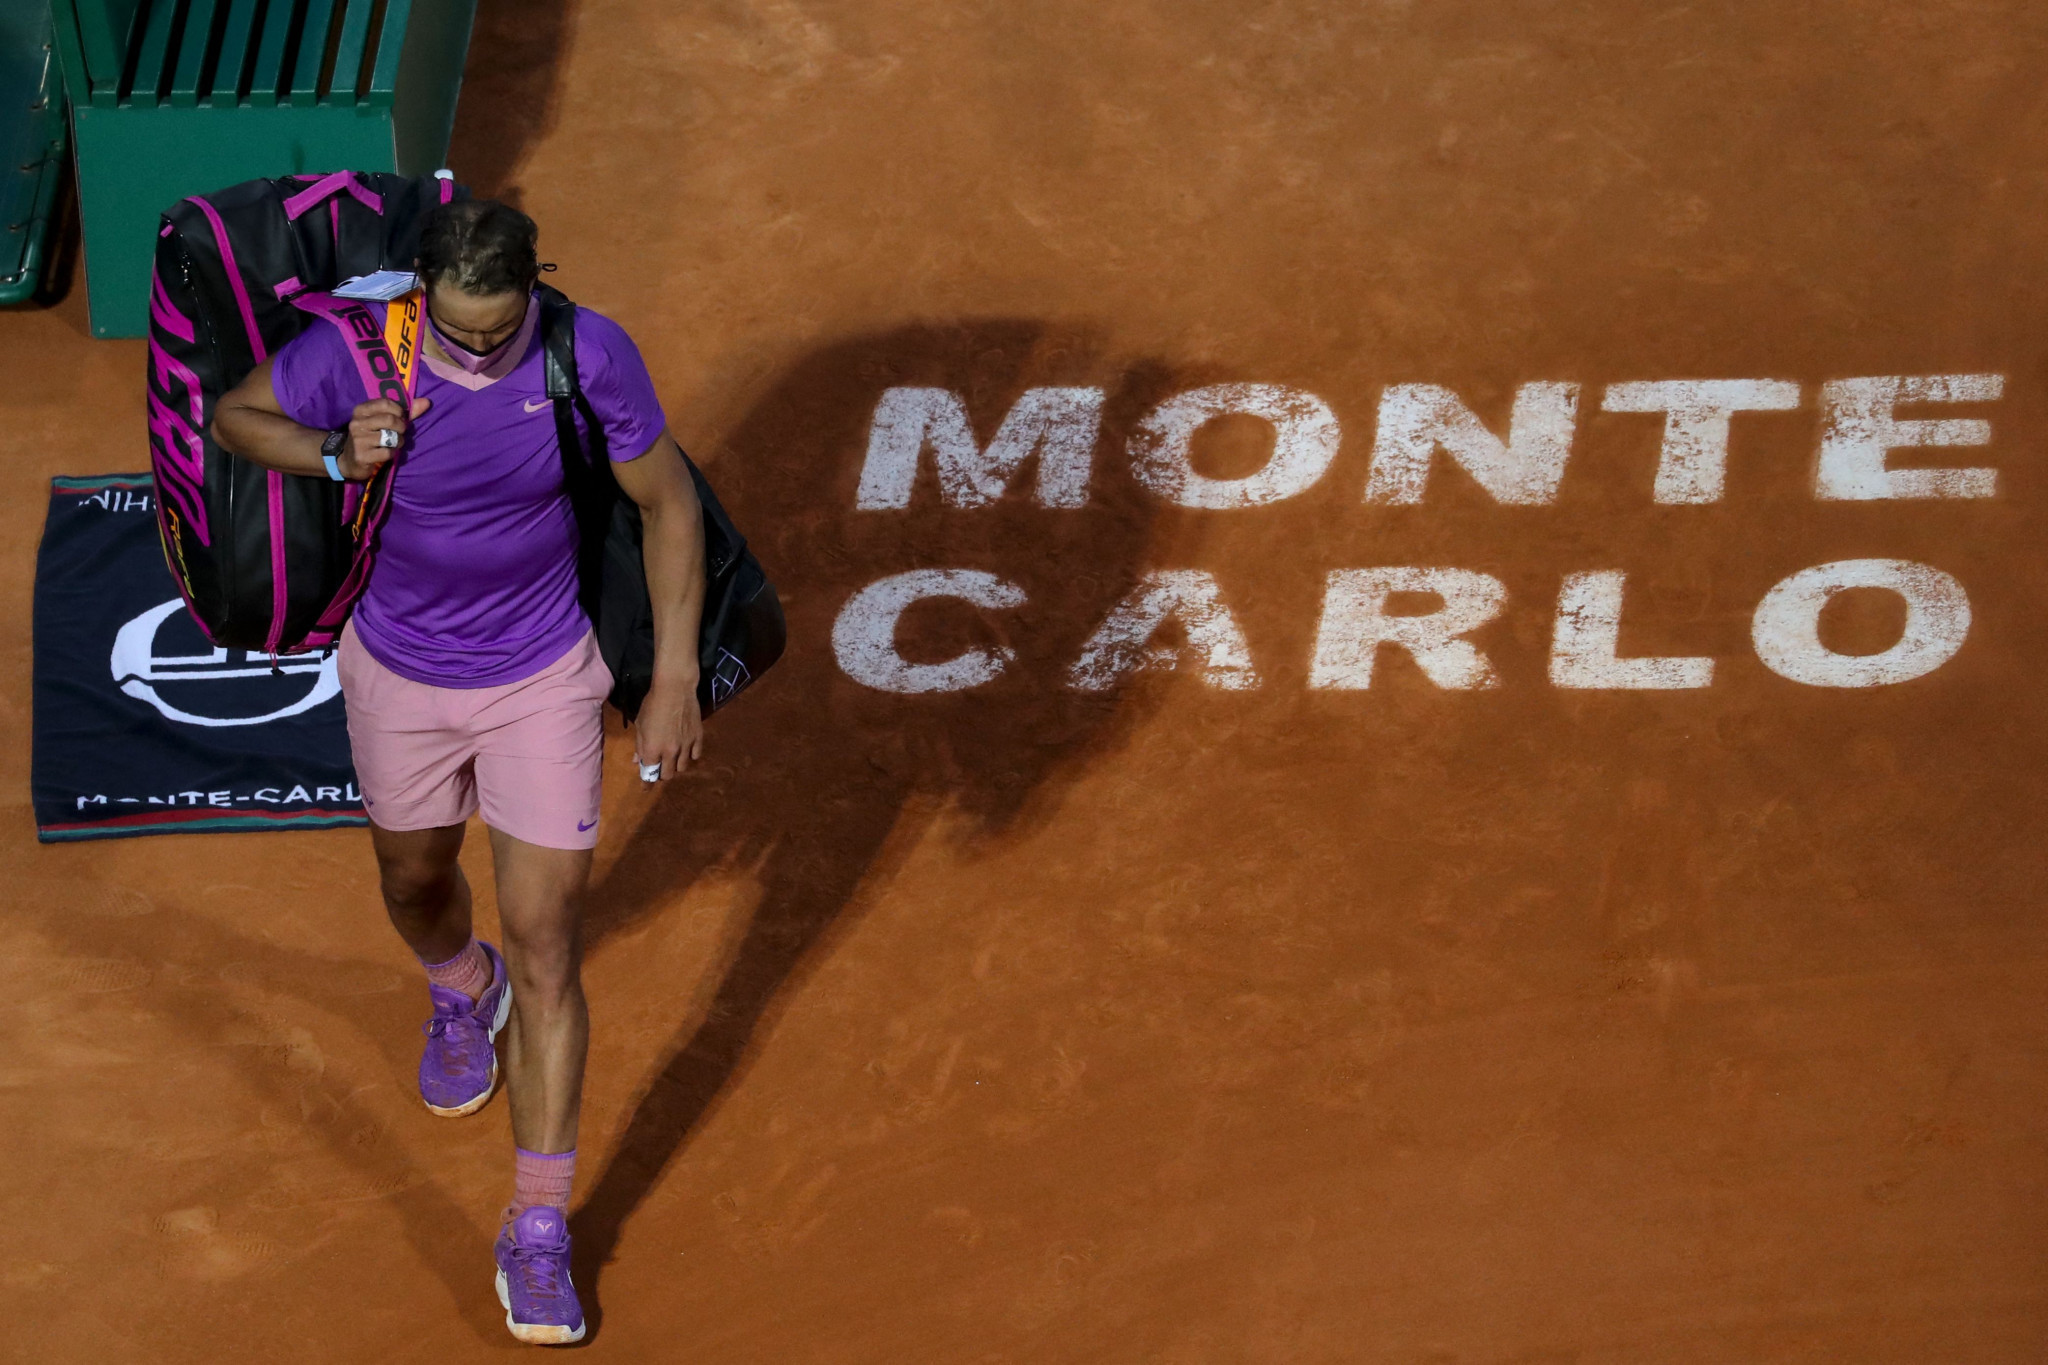 Rafael Nadal, playing in his first tournament since the Australian Open in February, fell at the quarter-finals of the Monte-Carlo Masters ©Getty Images